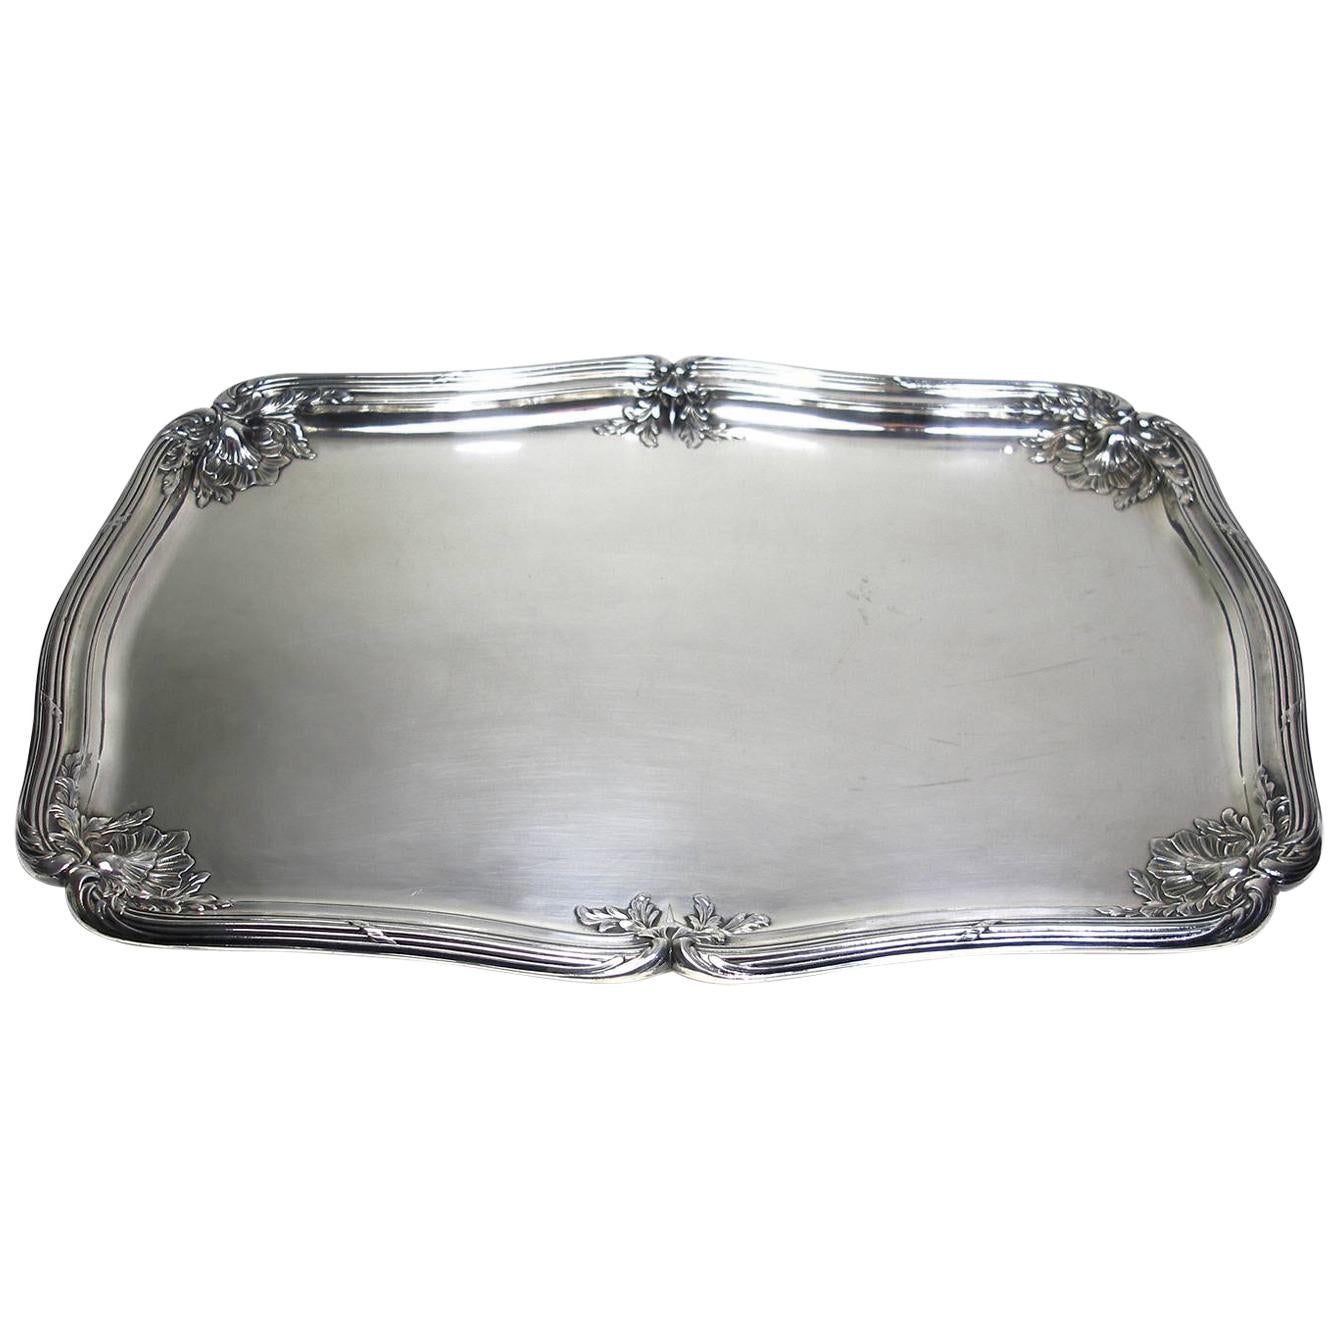 ANTIQUE French Silver Plated GALLIA by christofle Plateau Service Circa 1900 For Sale